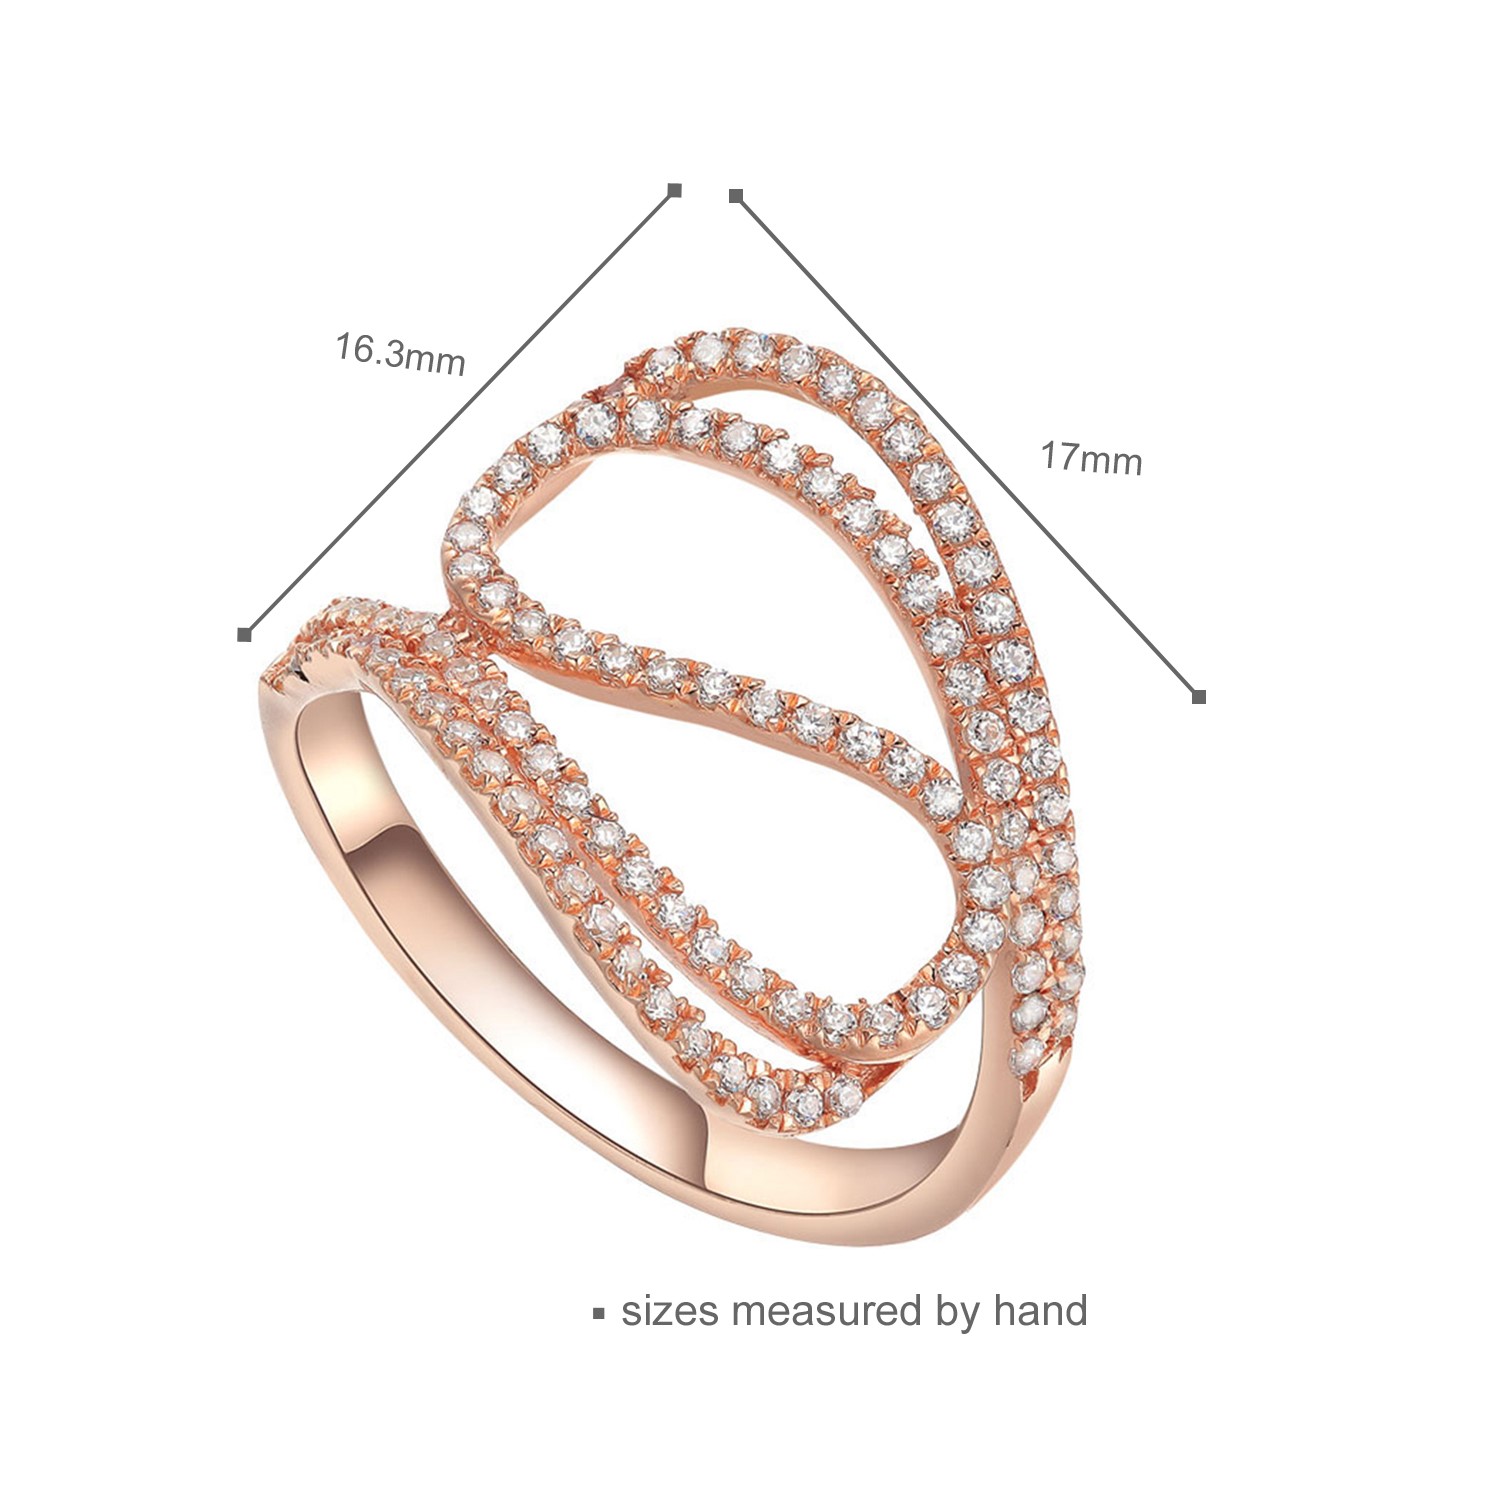 Popular design creatin rose gold Plating ring Cubic Zircon Stones 925 Sterling Silver Jewelry set women rings